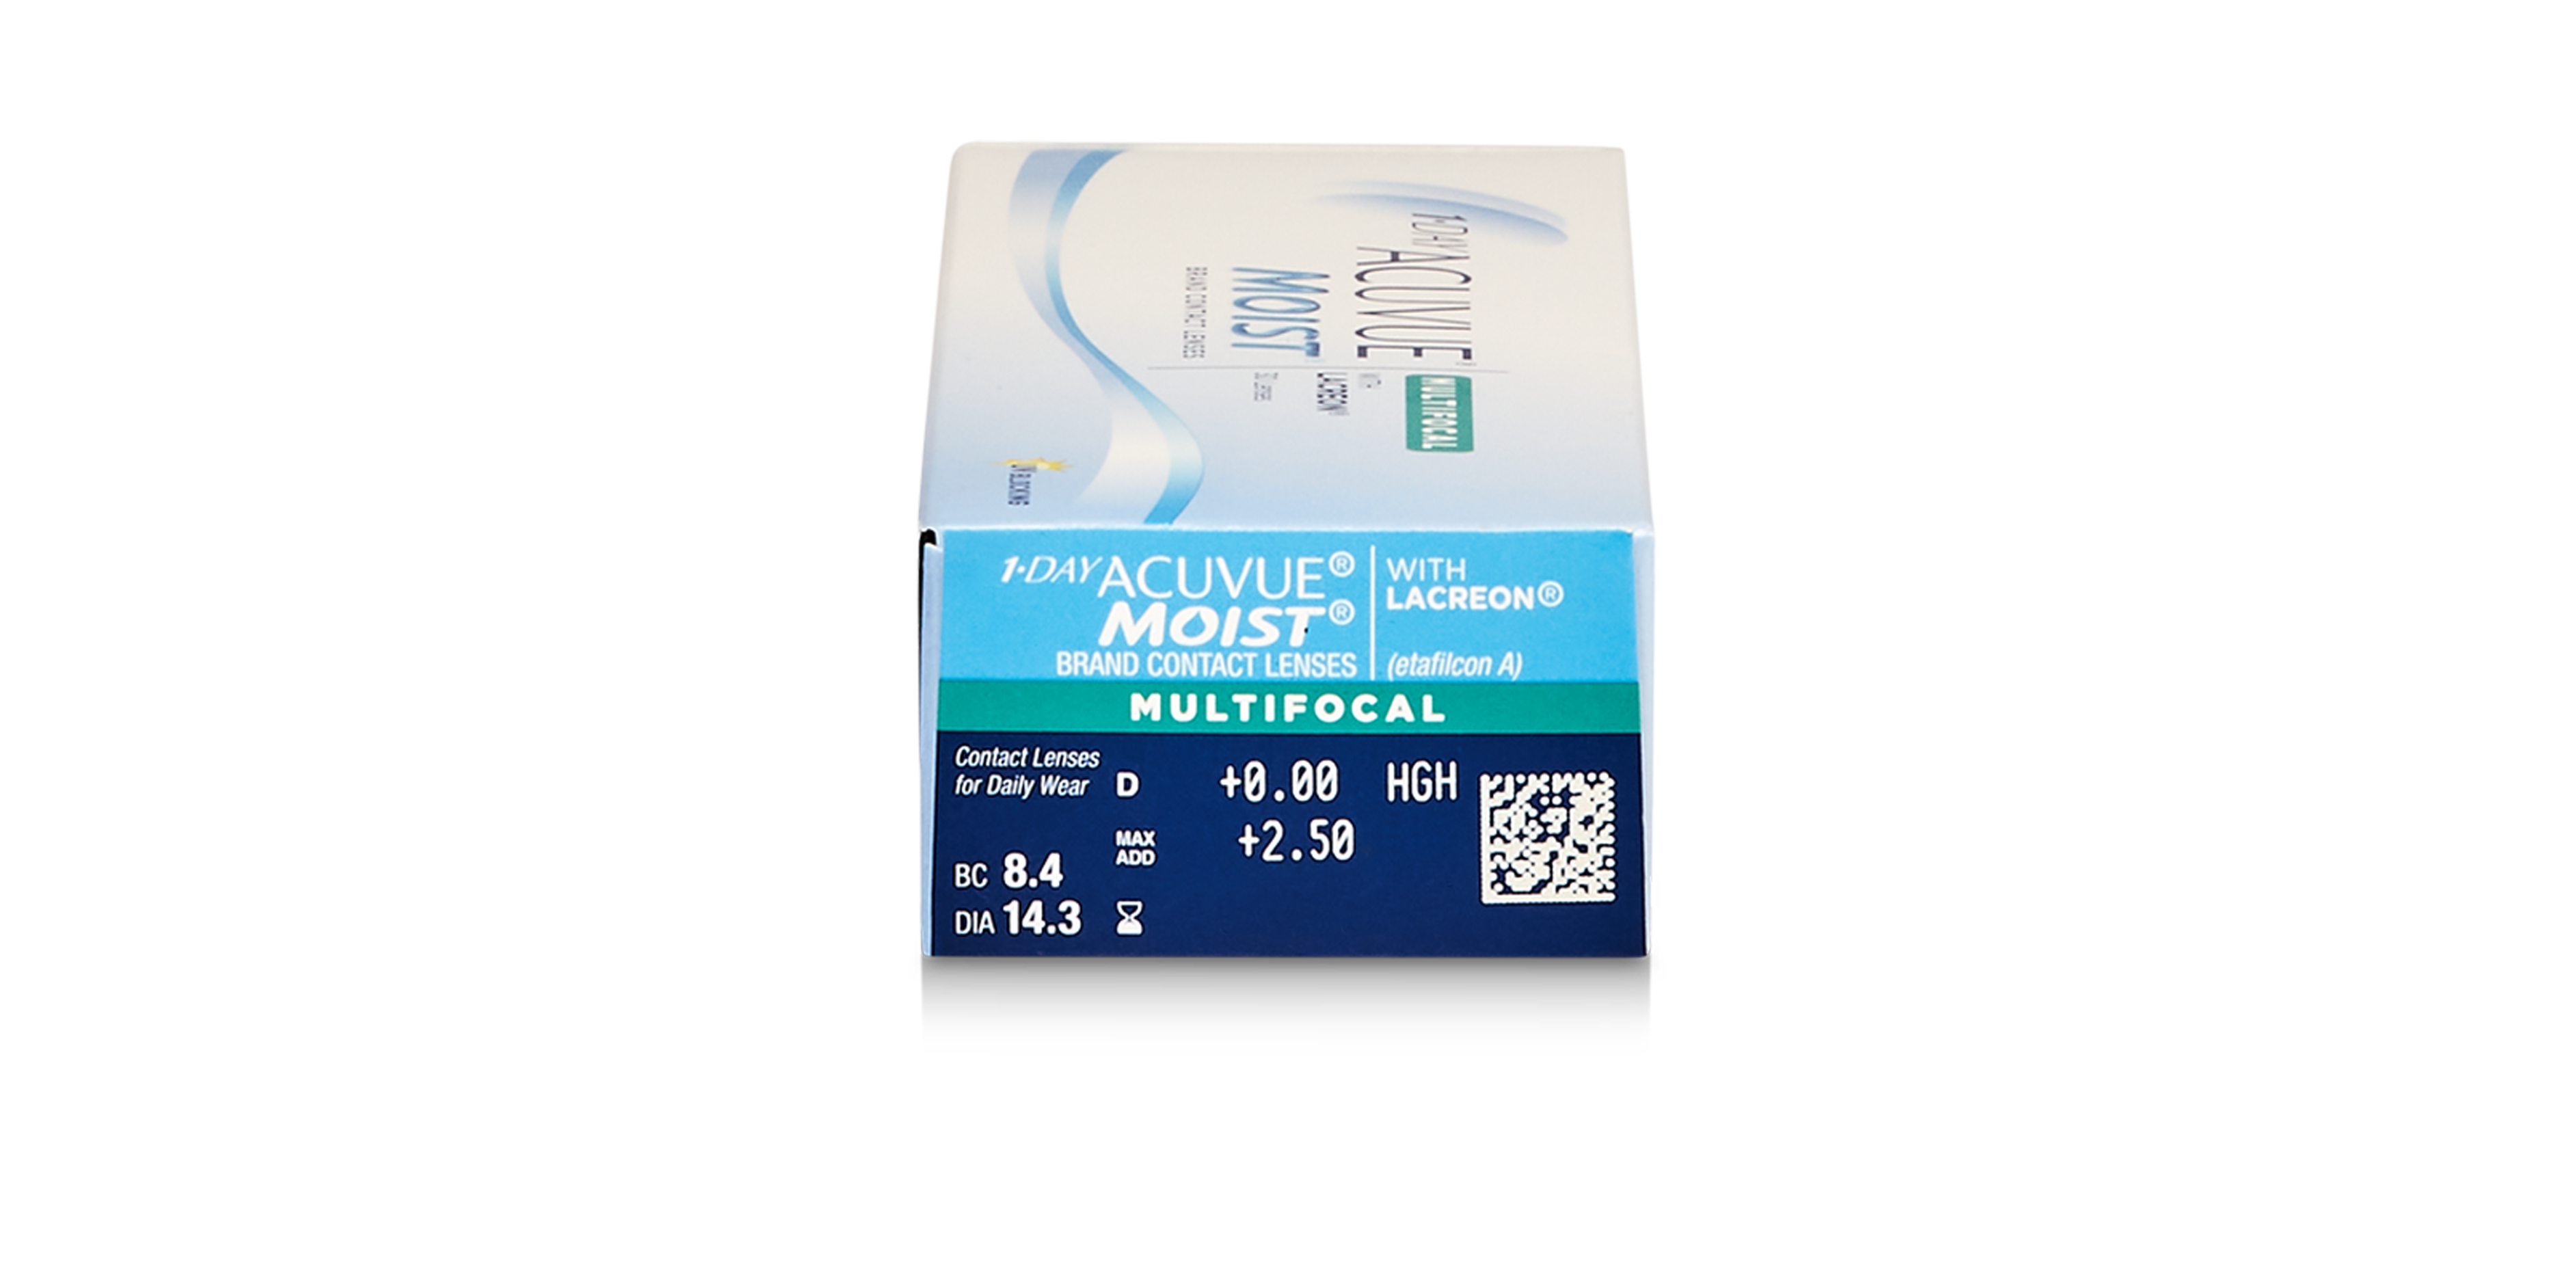 1-DAY ACUVUE® MOIST MULTIFOCAL, 30 Pack